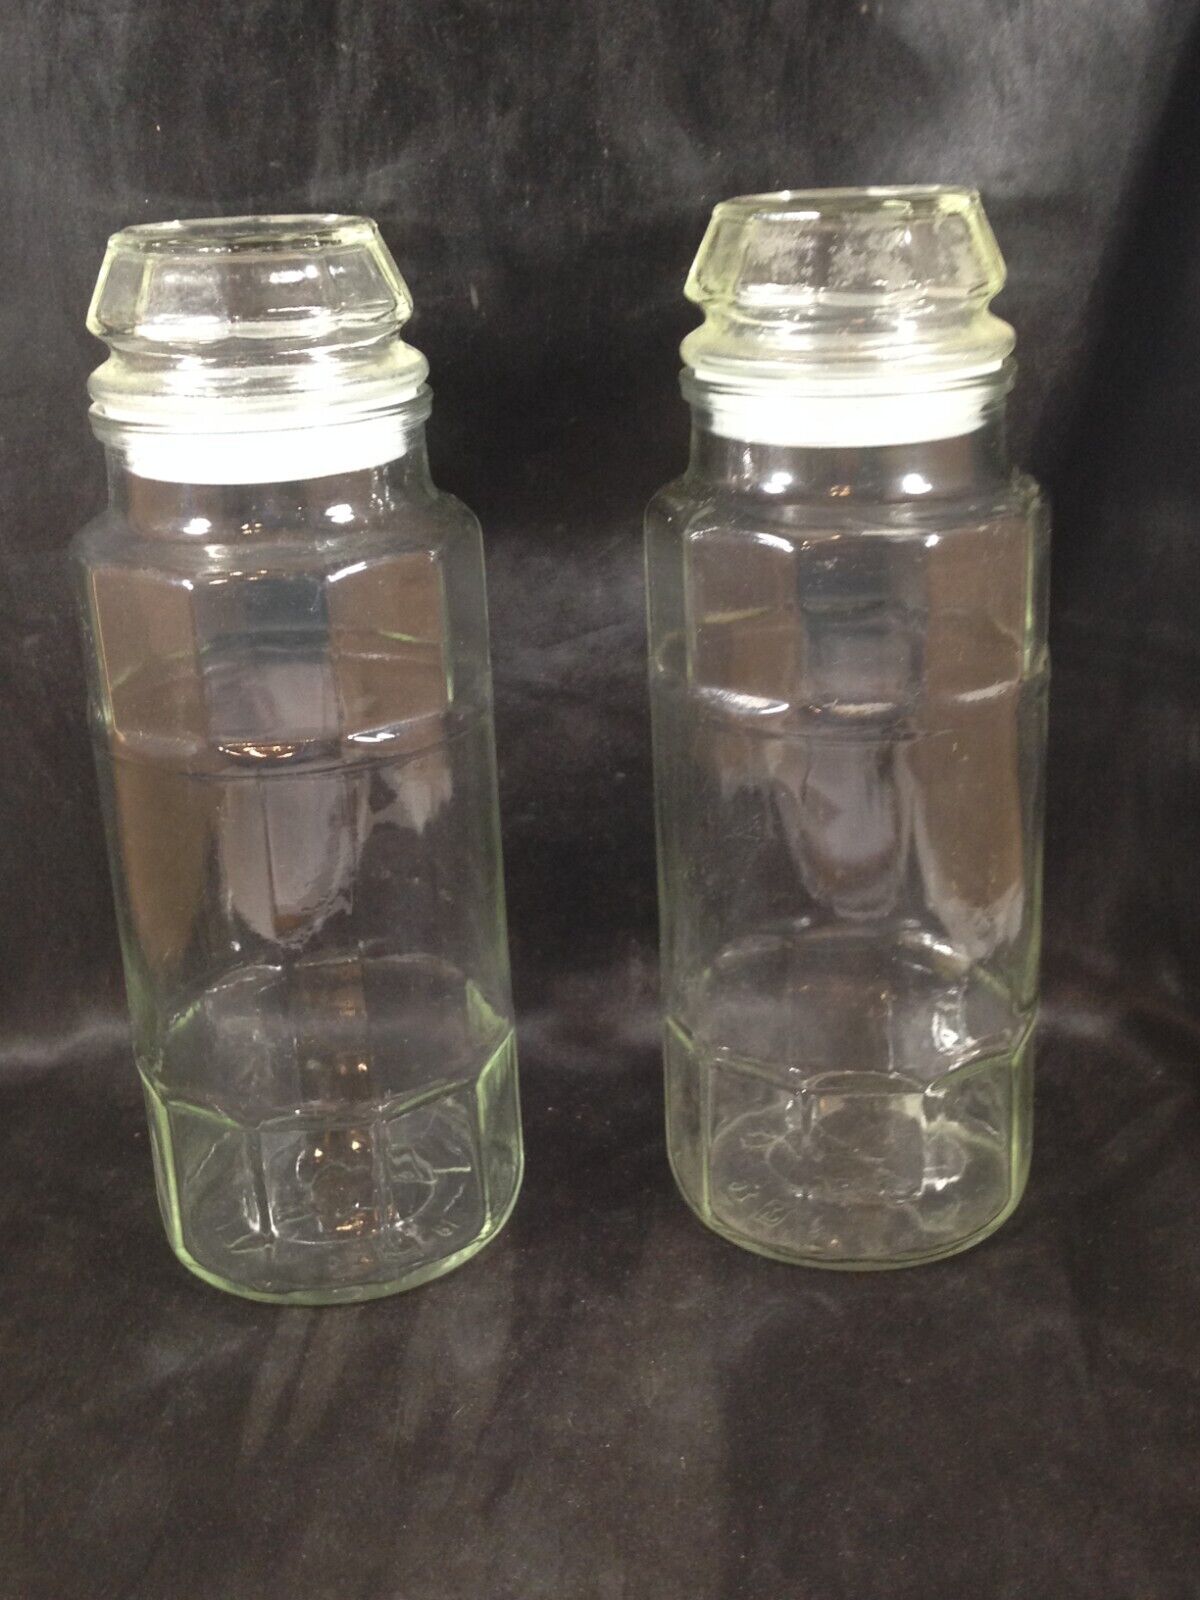 Pair of Vintage Planters Peanuts Clear Glass Canisters with Lids